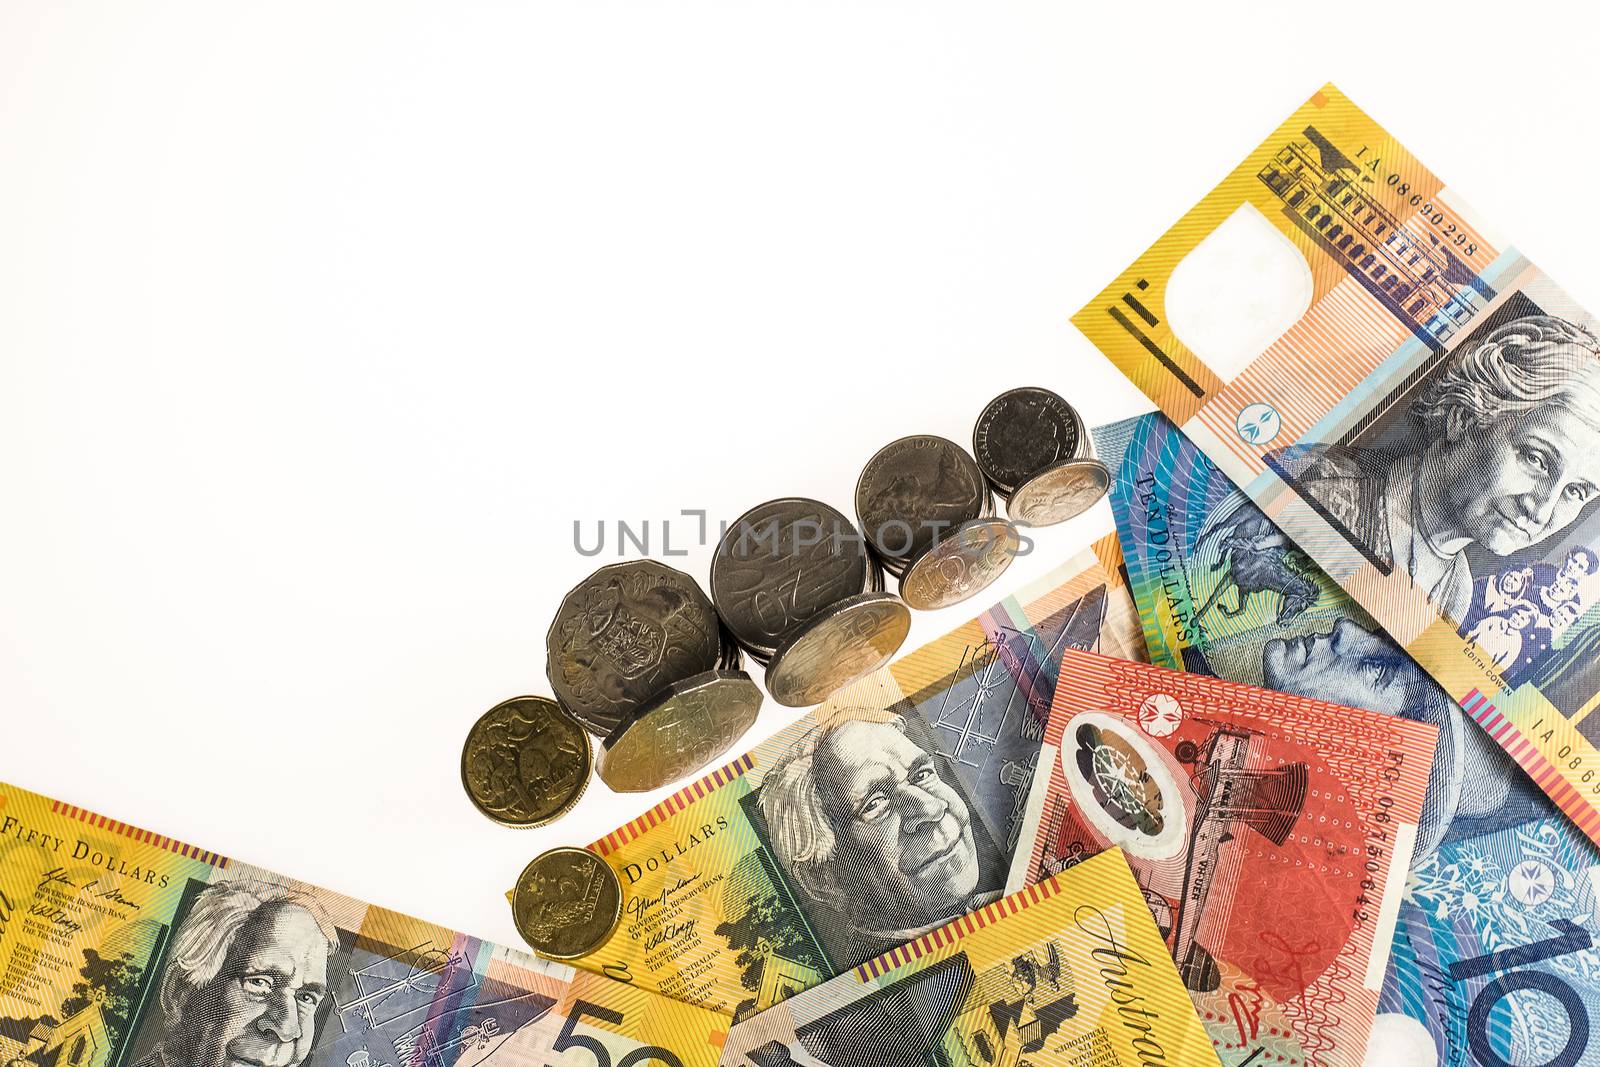 Australian currency used to purchase goods, also known as AUD.